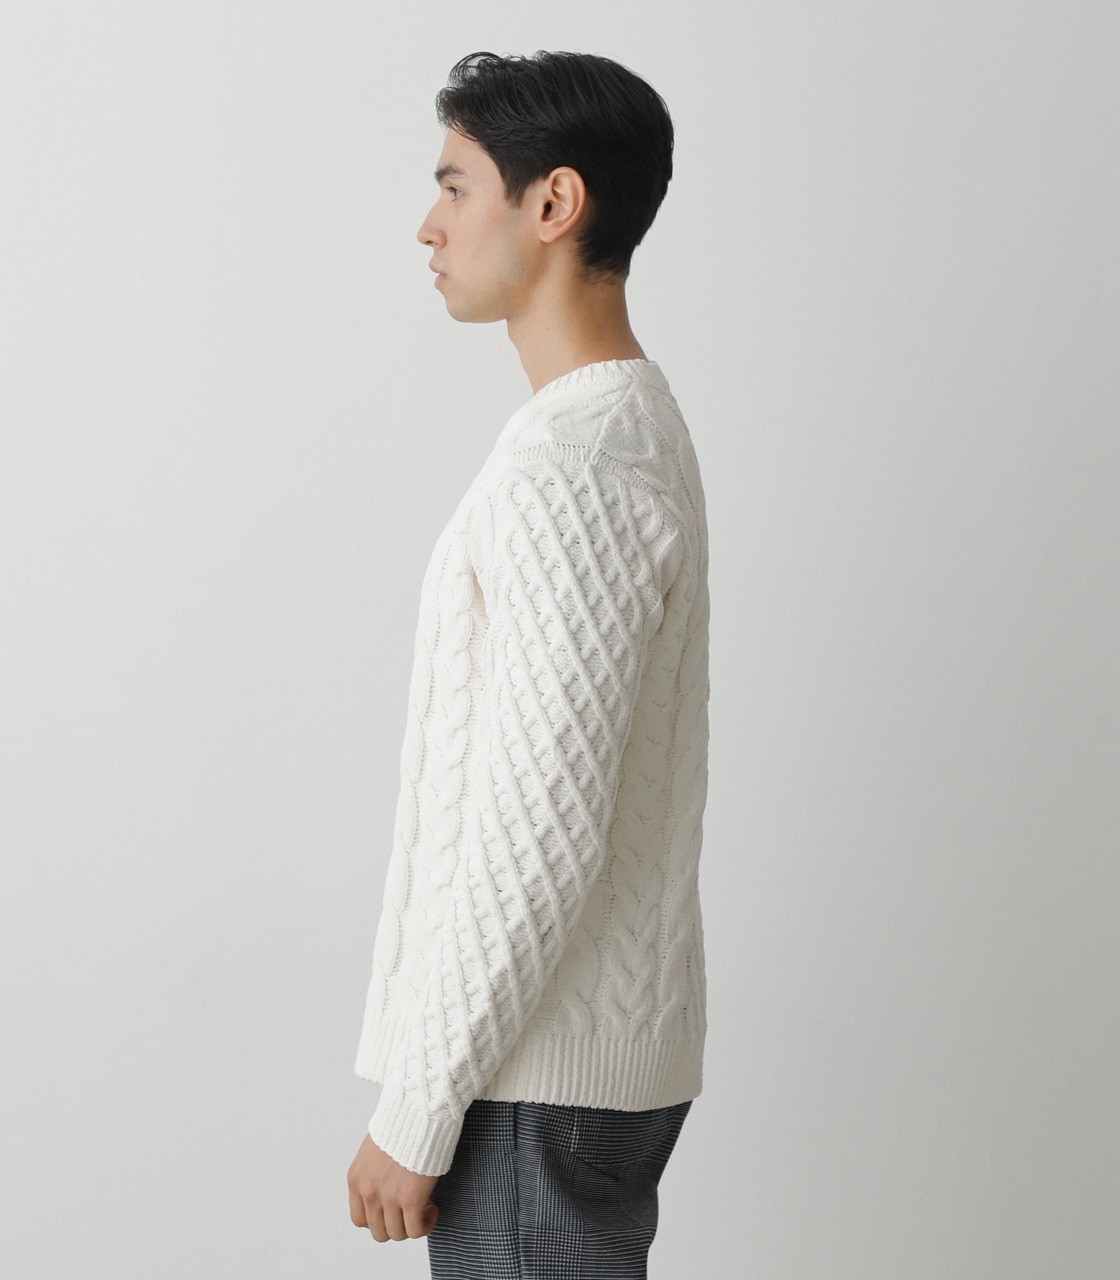 CHENILLE CABLE PULLOVER/シェニールケーブルプルオーバー 詳細画像 WHT 6